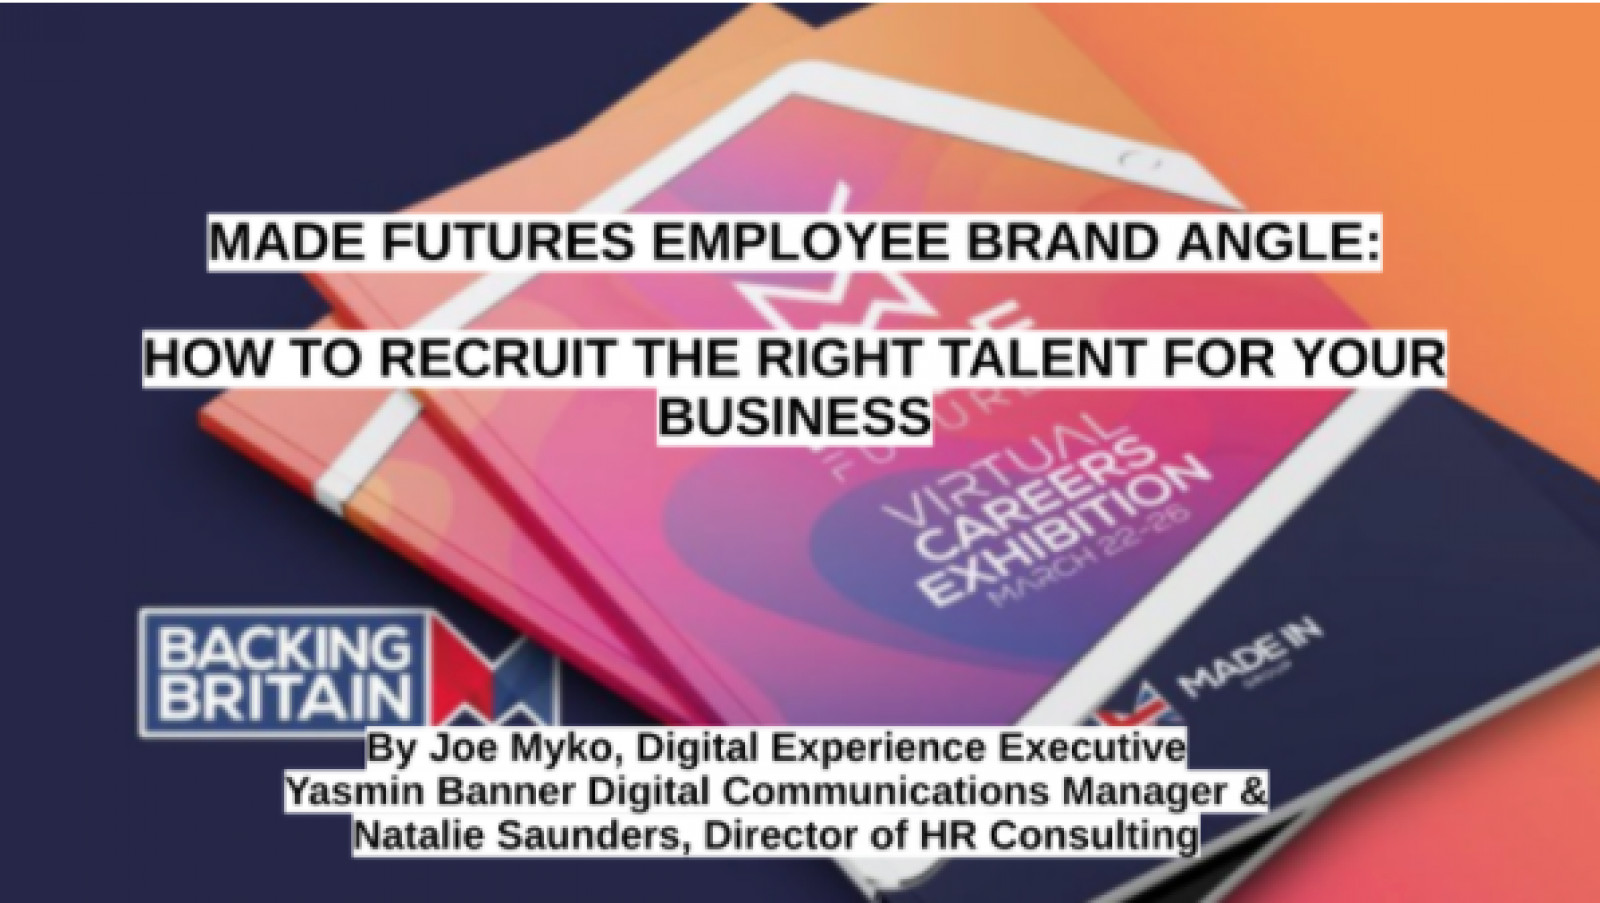 Made Futures Employee Brand Angle: How to Recruit...